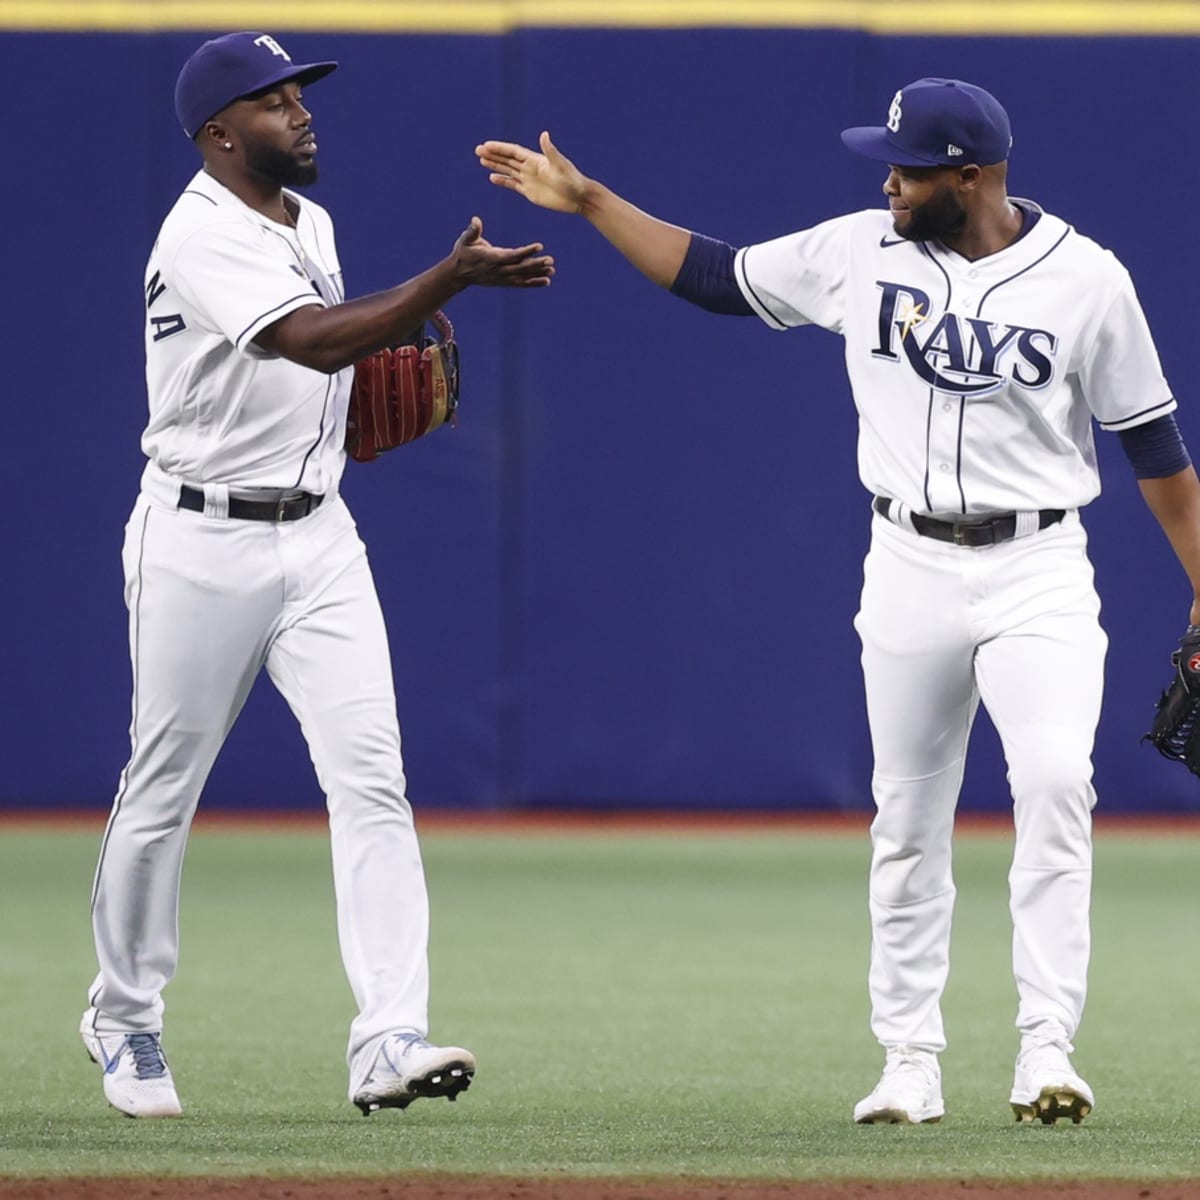 Tampa Bay Rays 2022 Major League Baseball Schedule With Dates, Locations  and Game Times - Sports Illustrated Tampa Bay Rays Scoop News, Analysis and  More